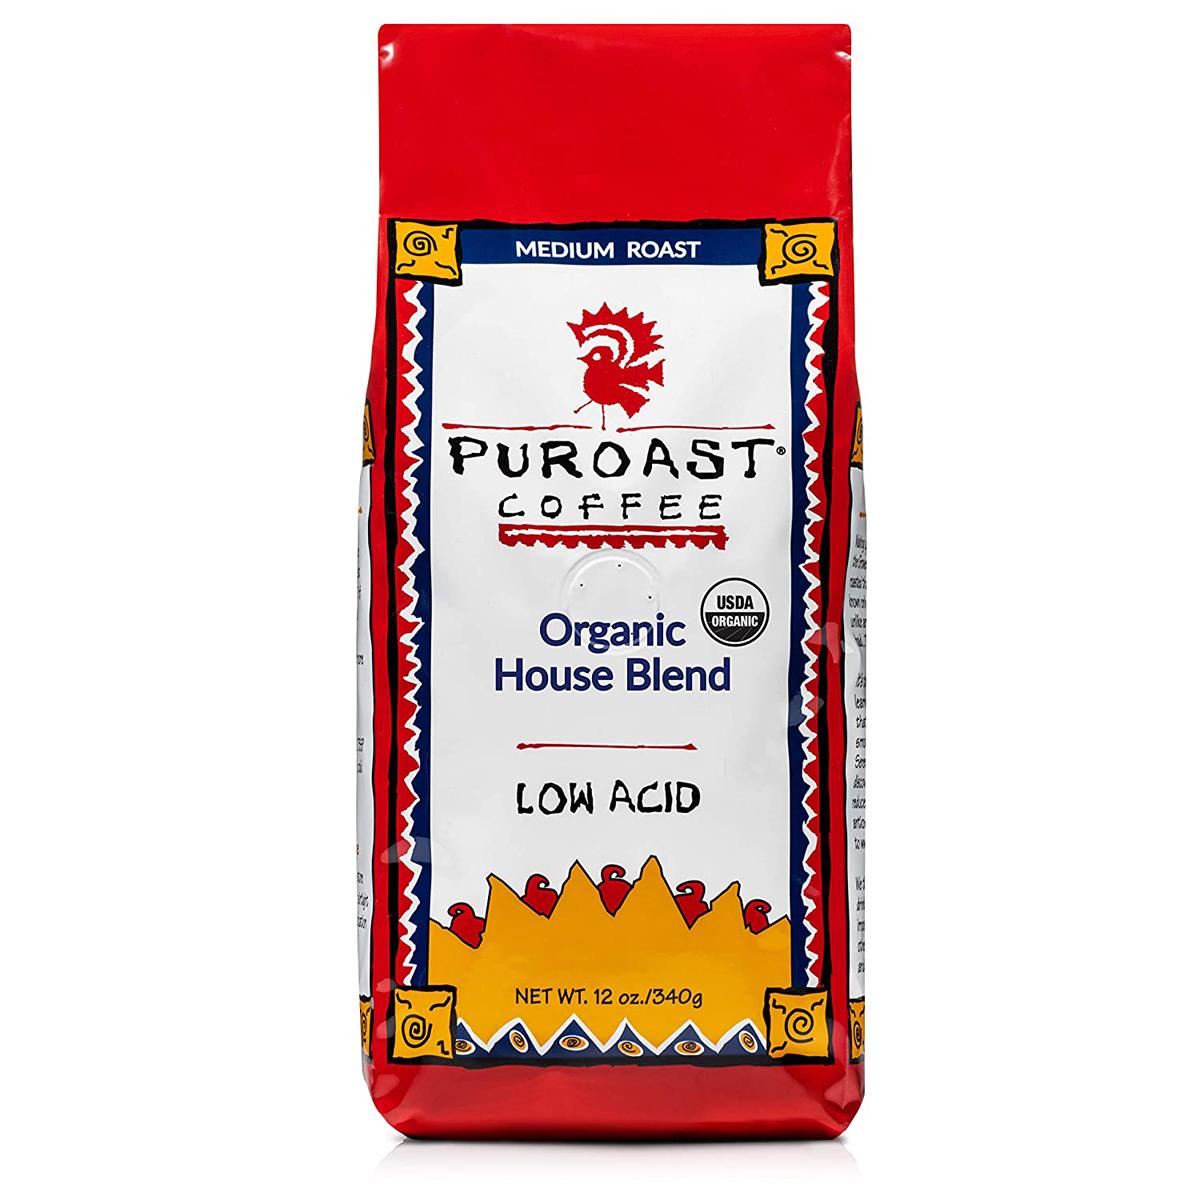 Puroast Low Acid Whole Bean Coffee Pack of 2 for $10.99